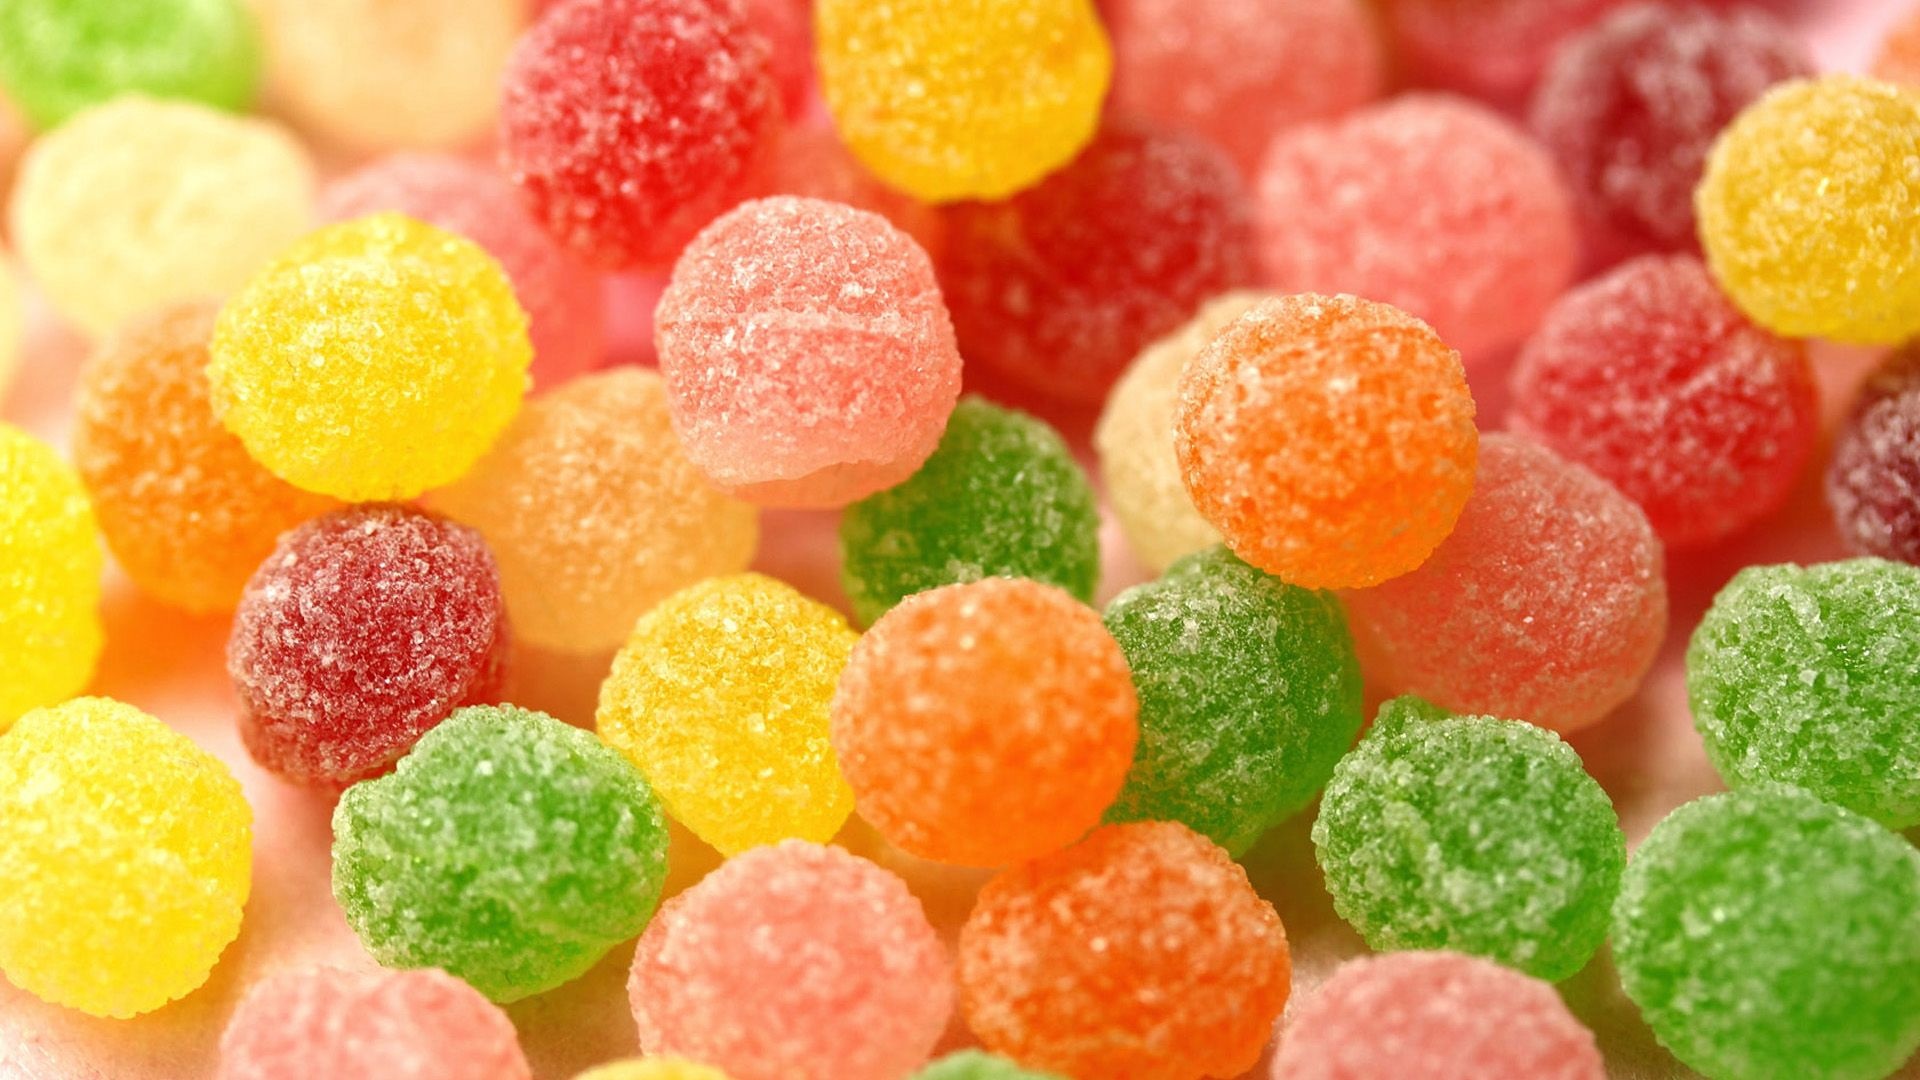 Candy desktop wallpapers, Colorful and fun, Eye-catching designs, Sugary inspiration, 1920x1080 Full HD Desktop